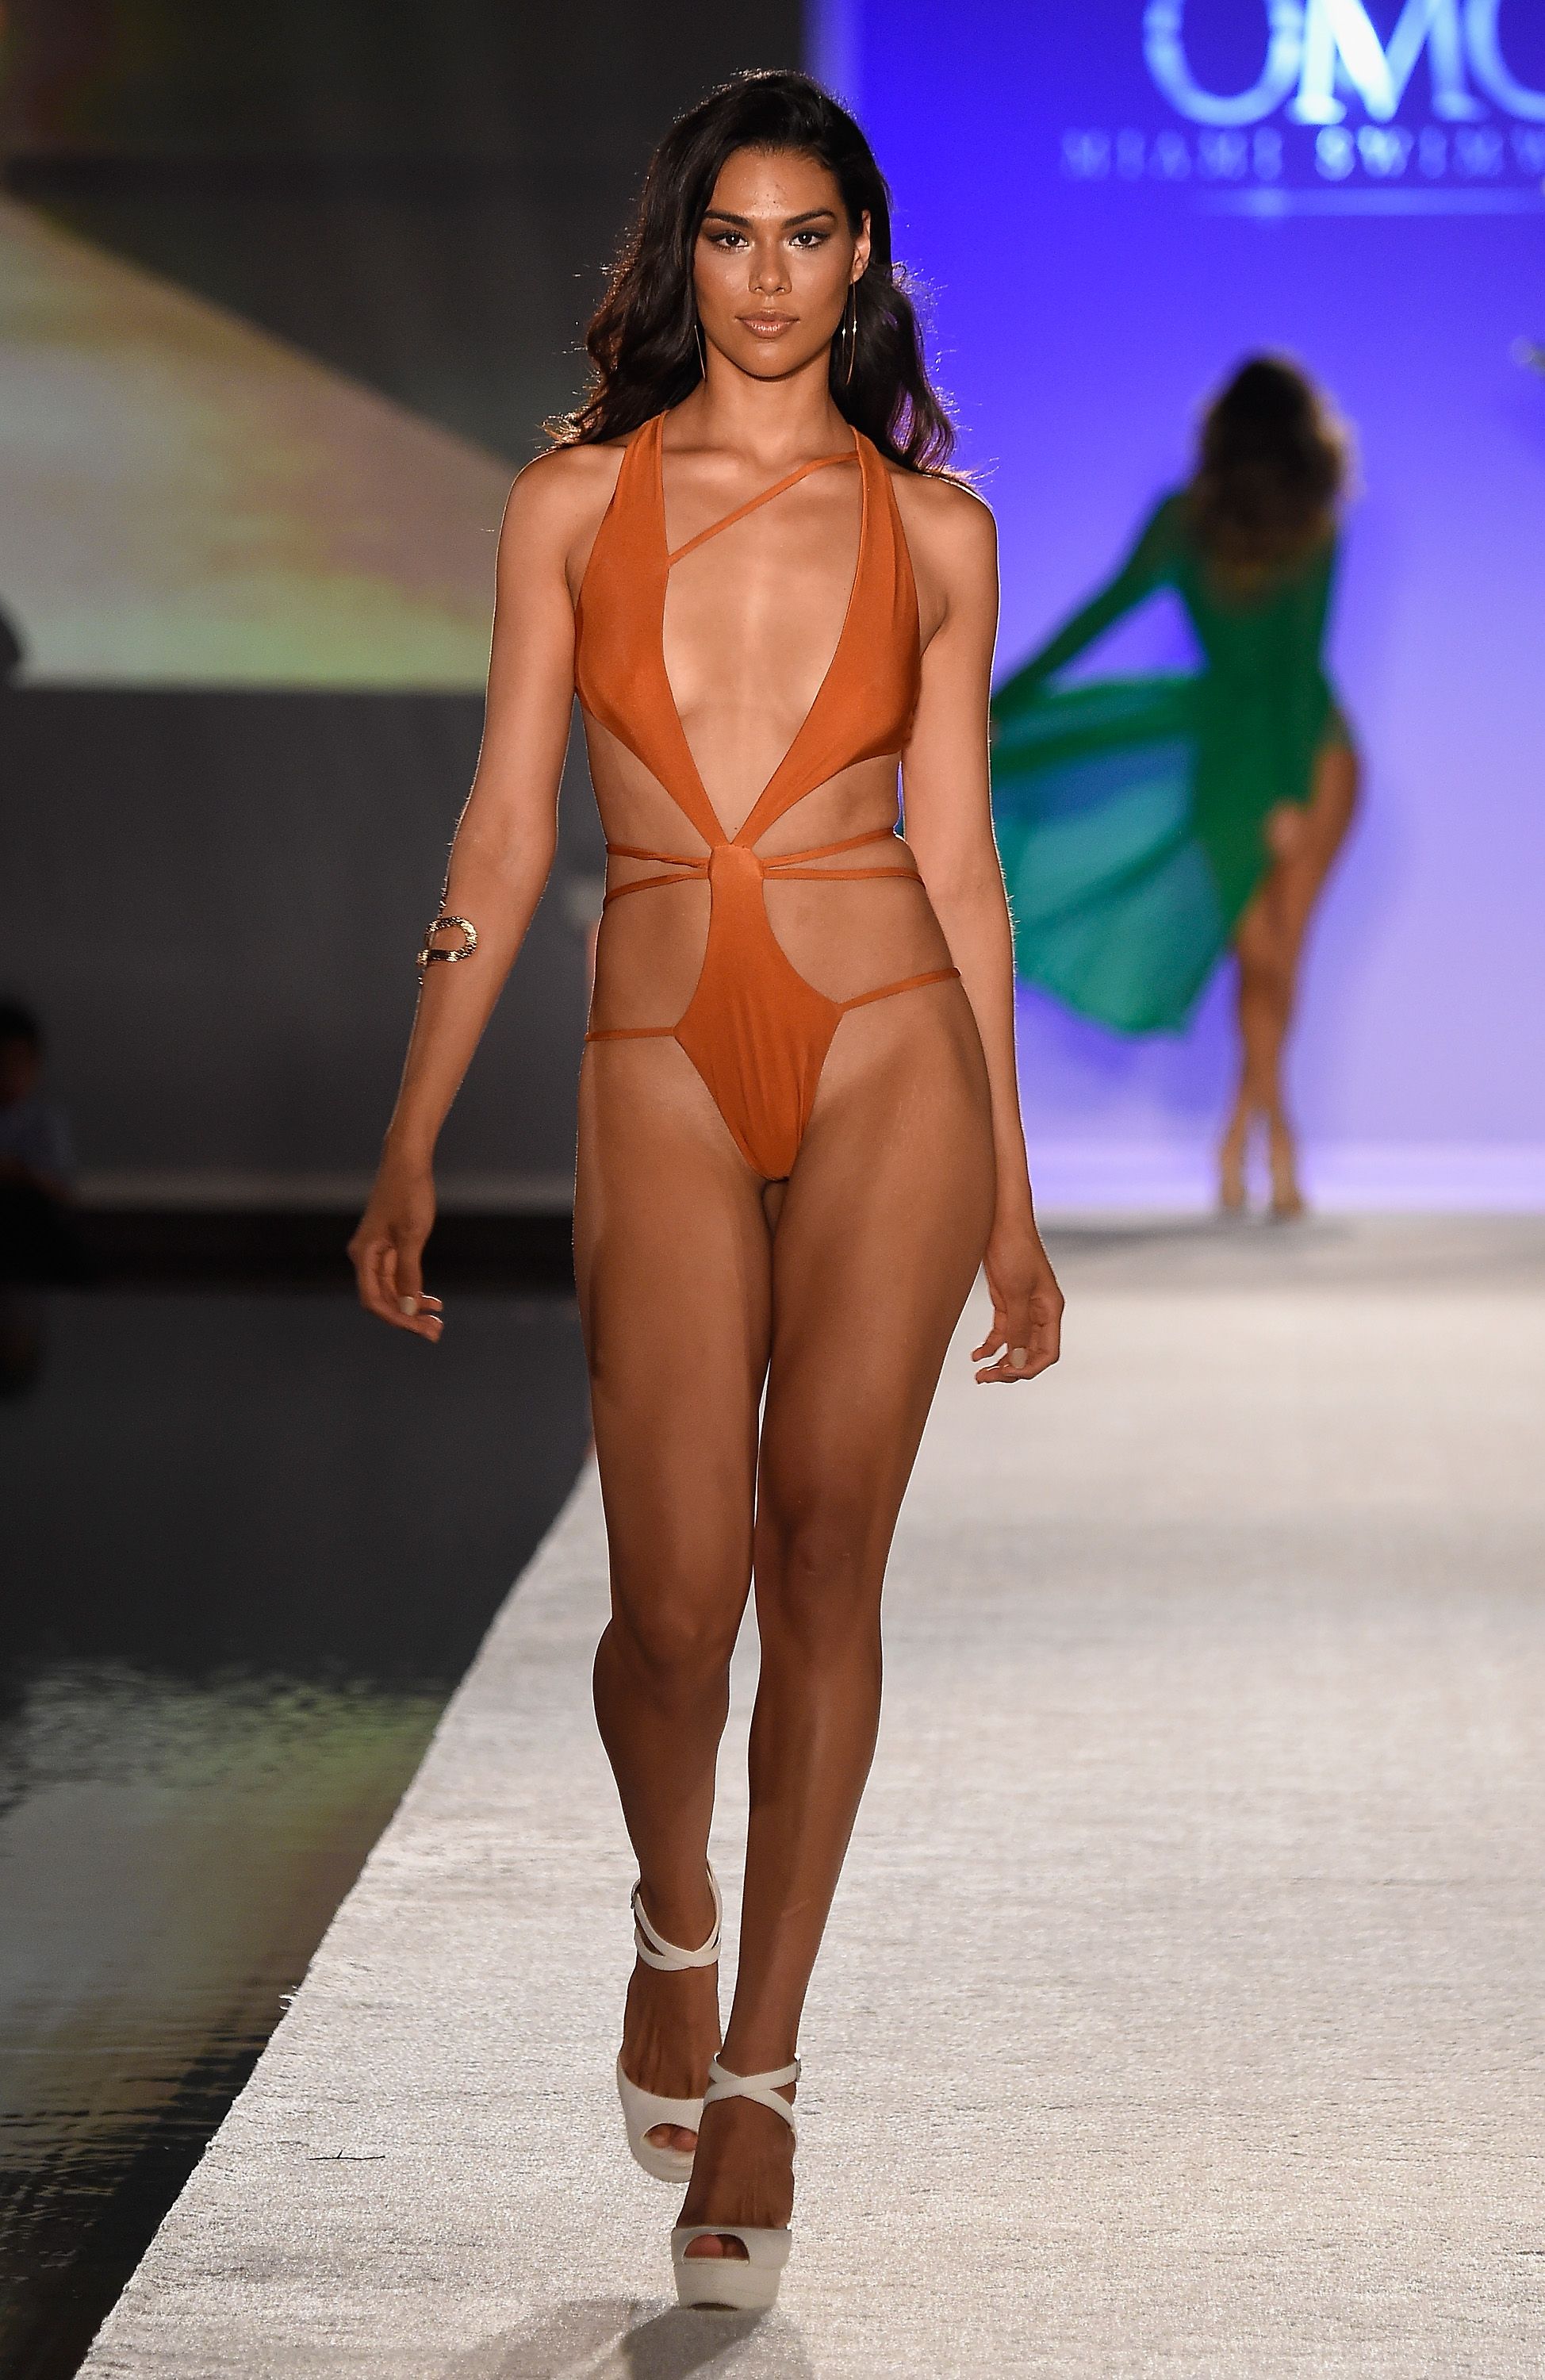 Miami Swim Week 2016 - Revealing Front Bathing Suits on the Runway